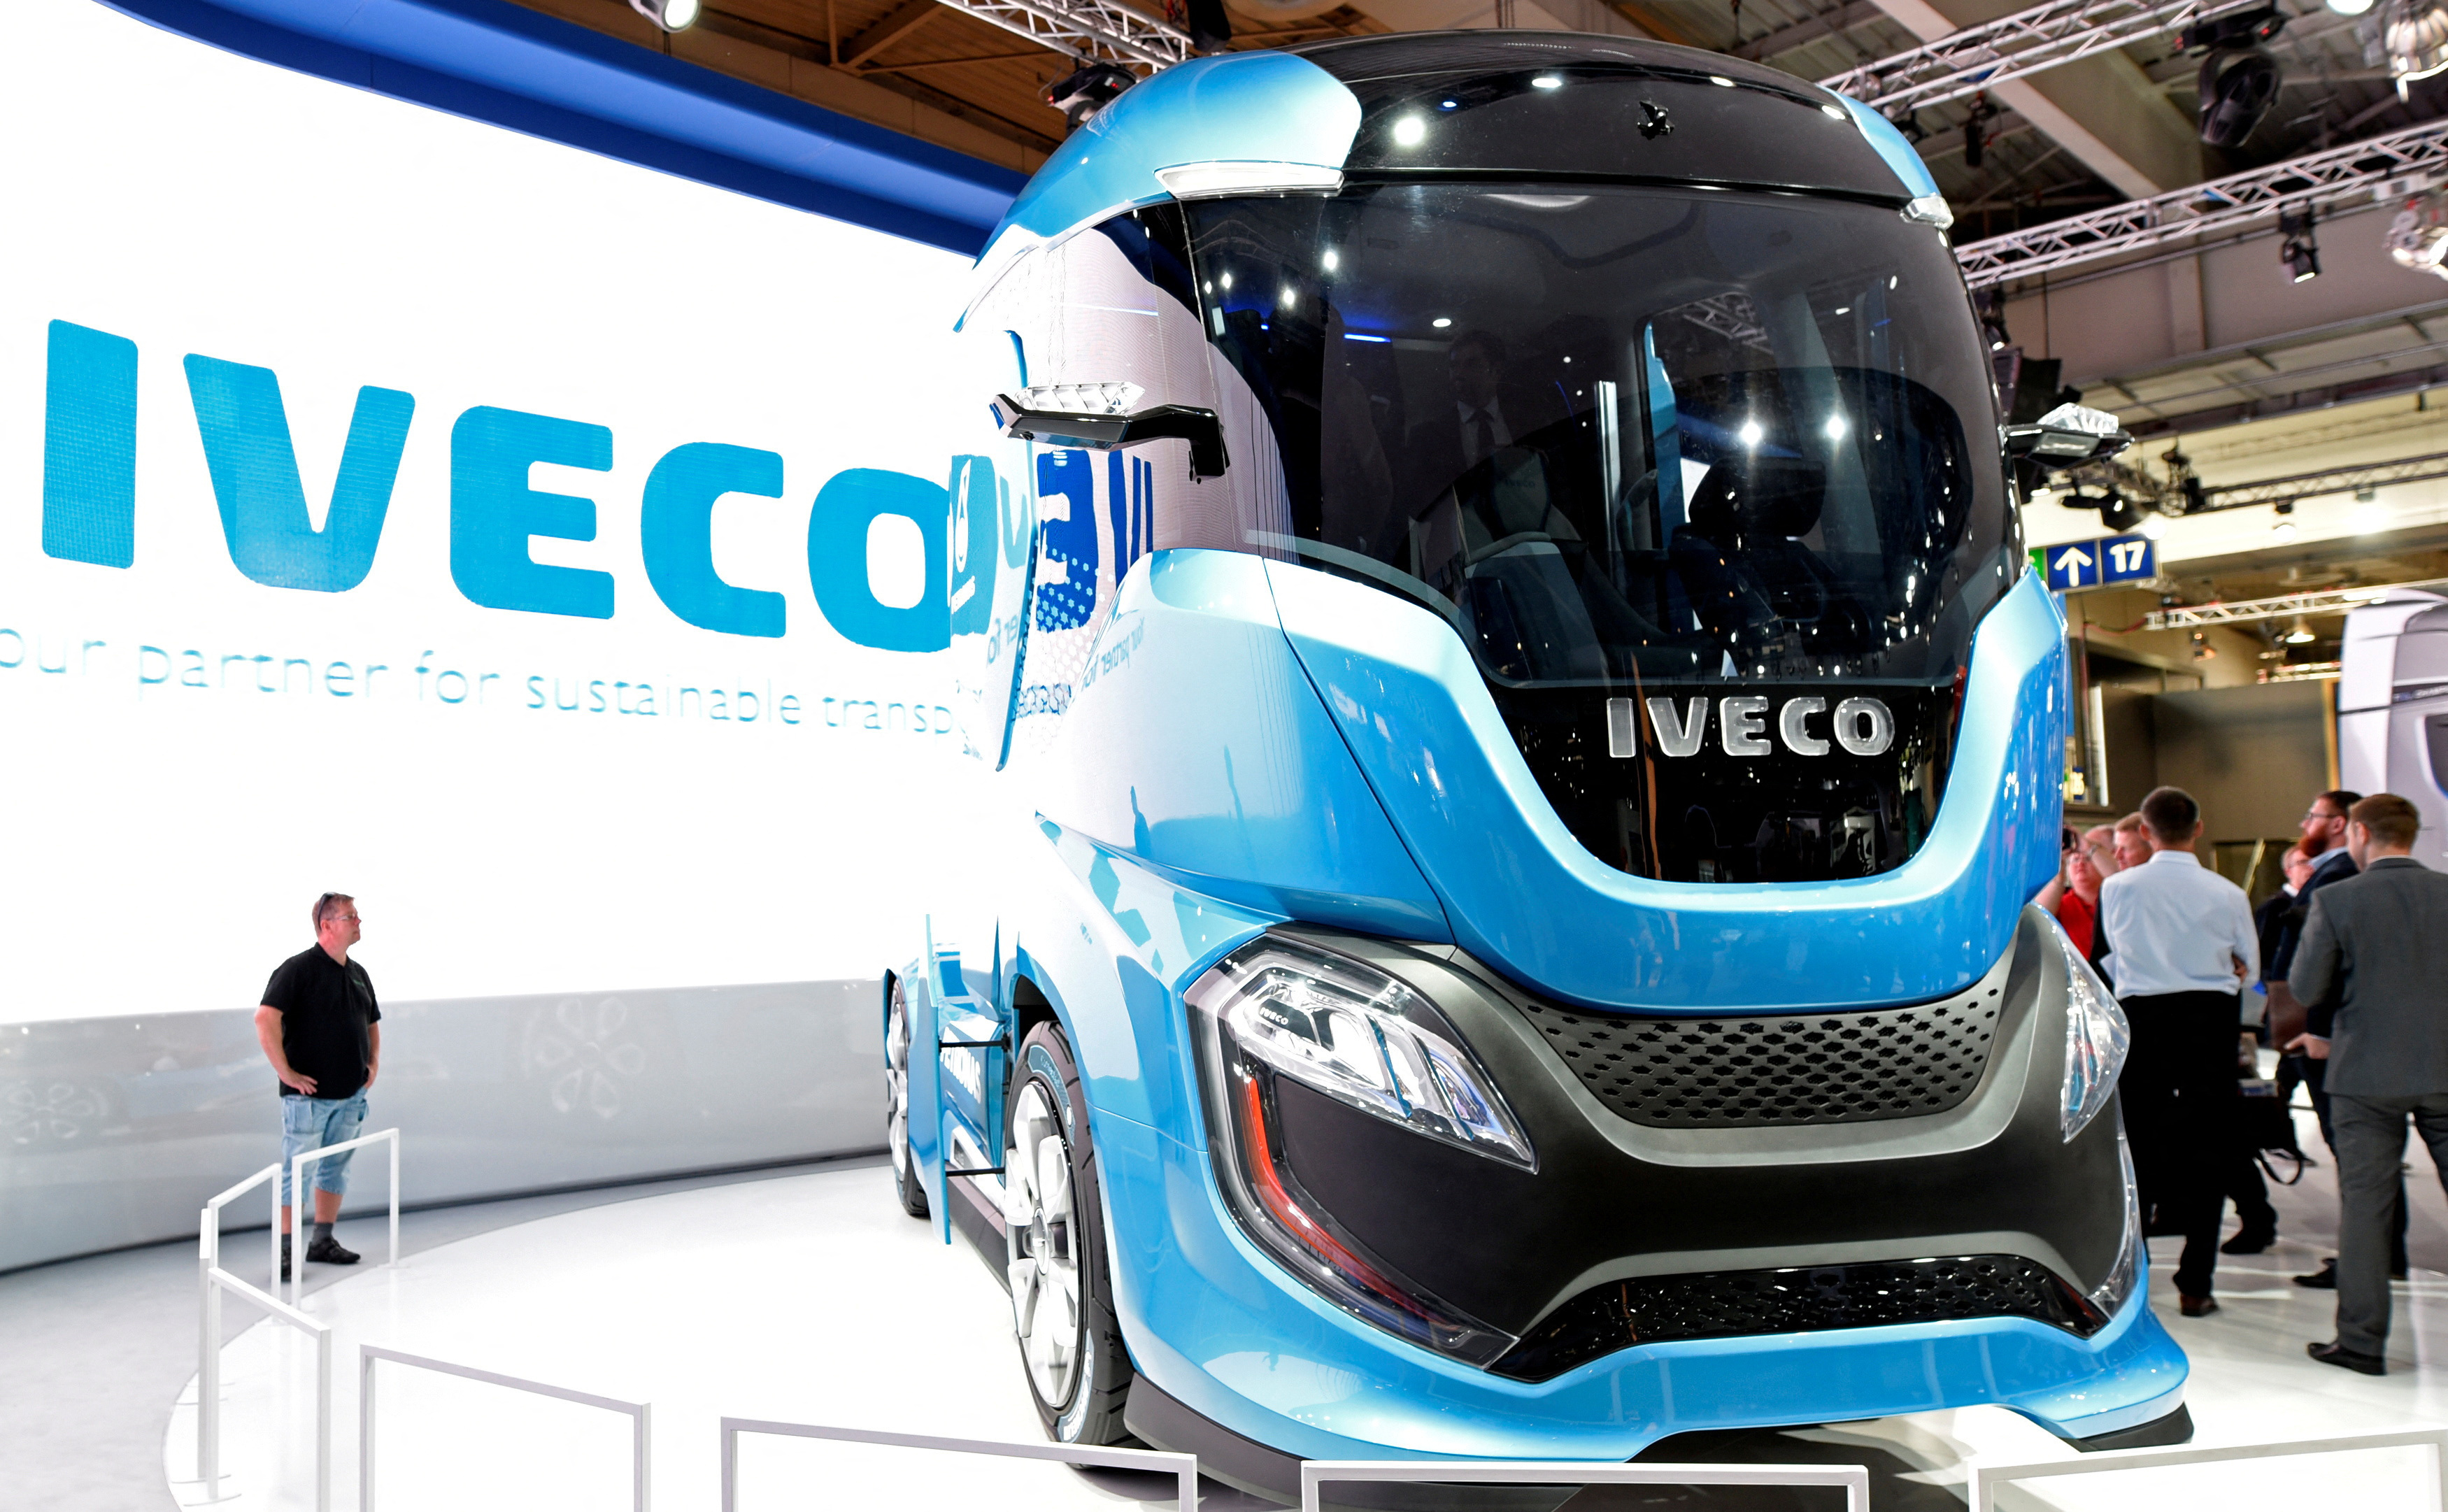 An Iveco truck is seen at the IAA Commercial Vehicles trade show in Hanover